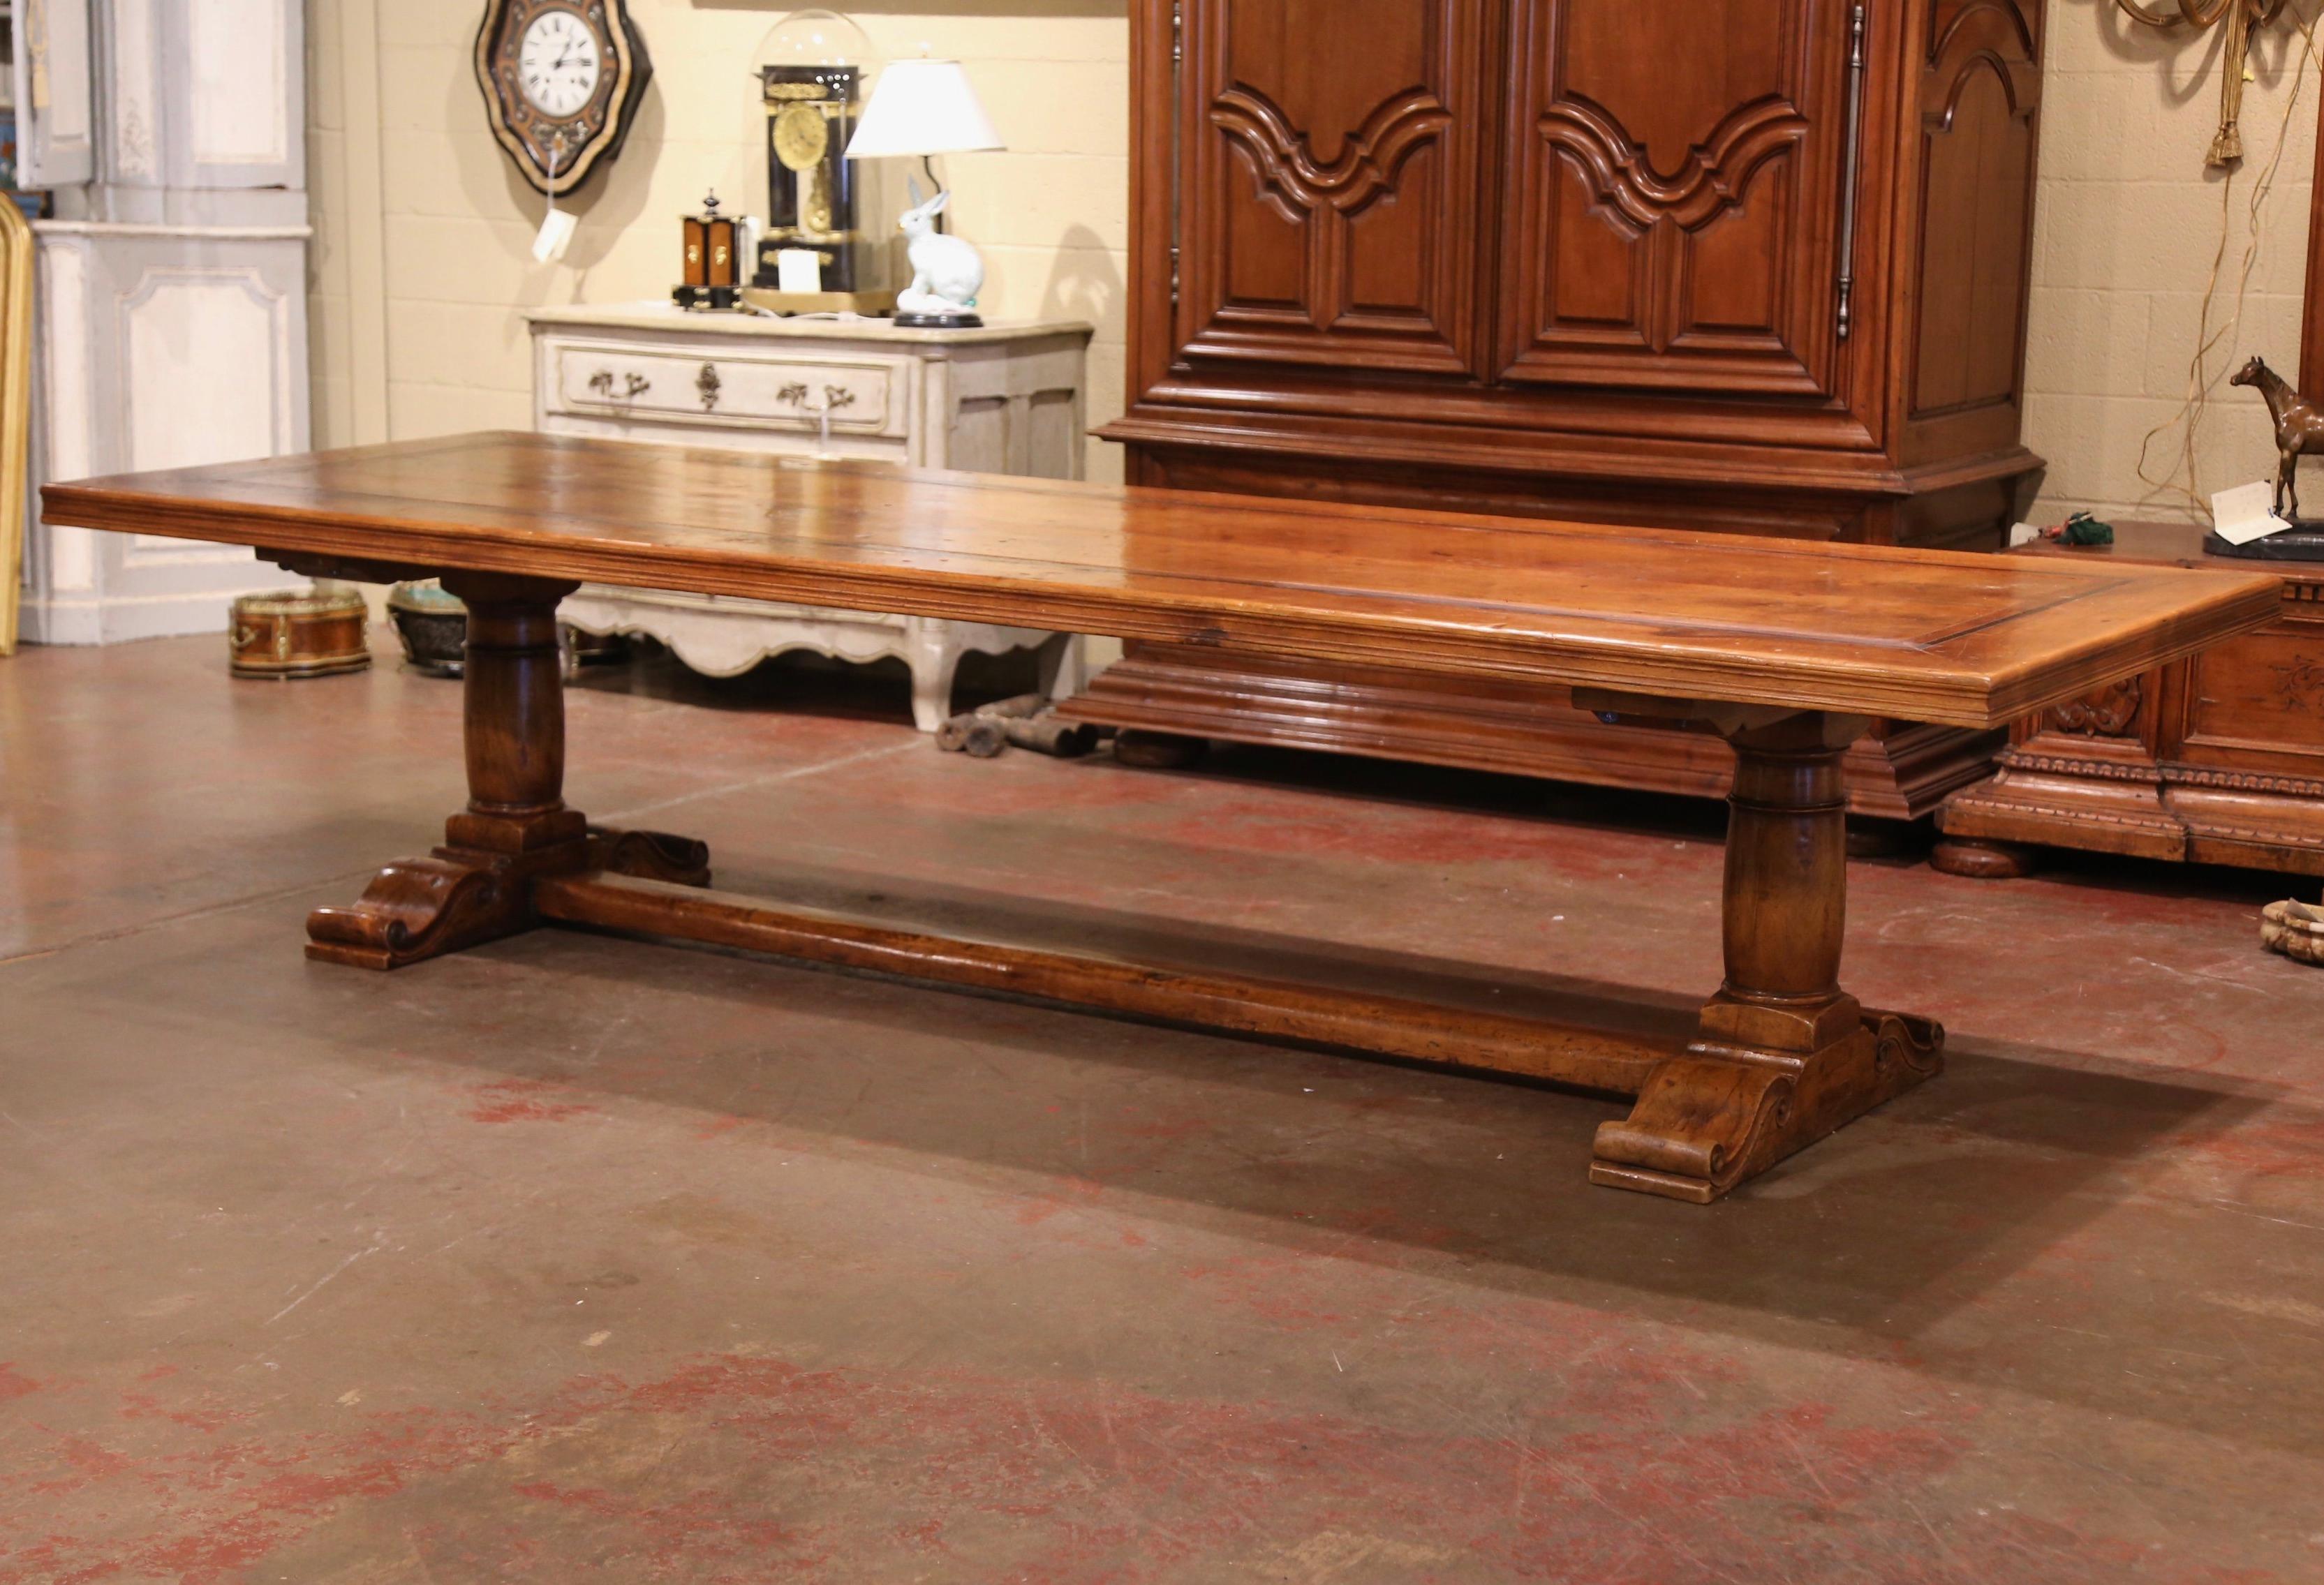 Almost 11 feet long, this large fruitwood dining room table was crafted in southwest France, near the Spanish and French border. Built with 18th century antique walnut timber, the table stands on a trestle base, with two hand carved baluster legs